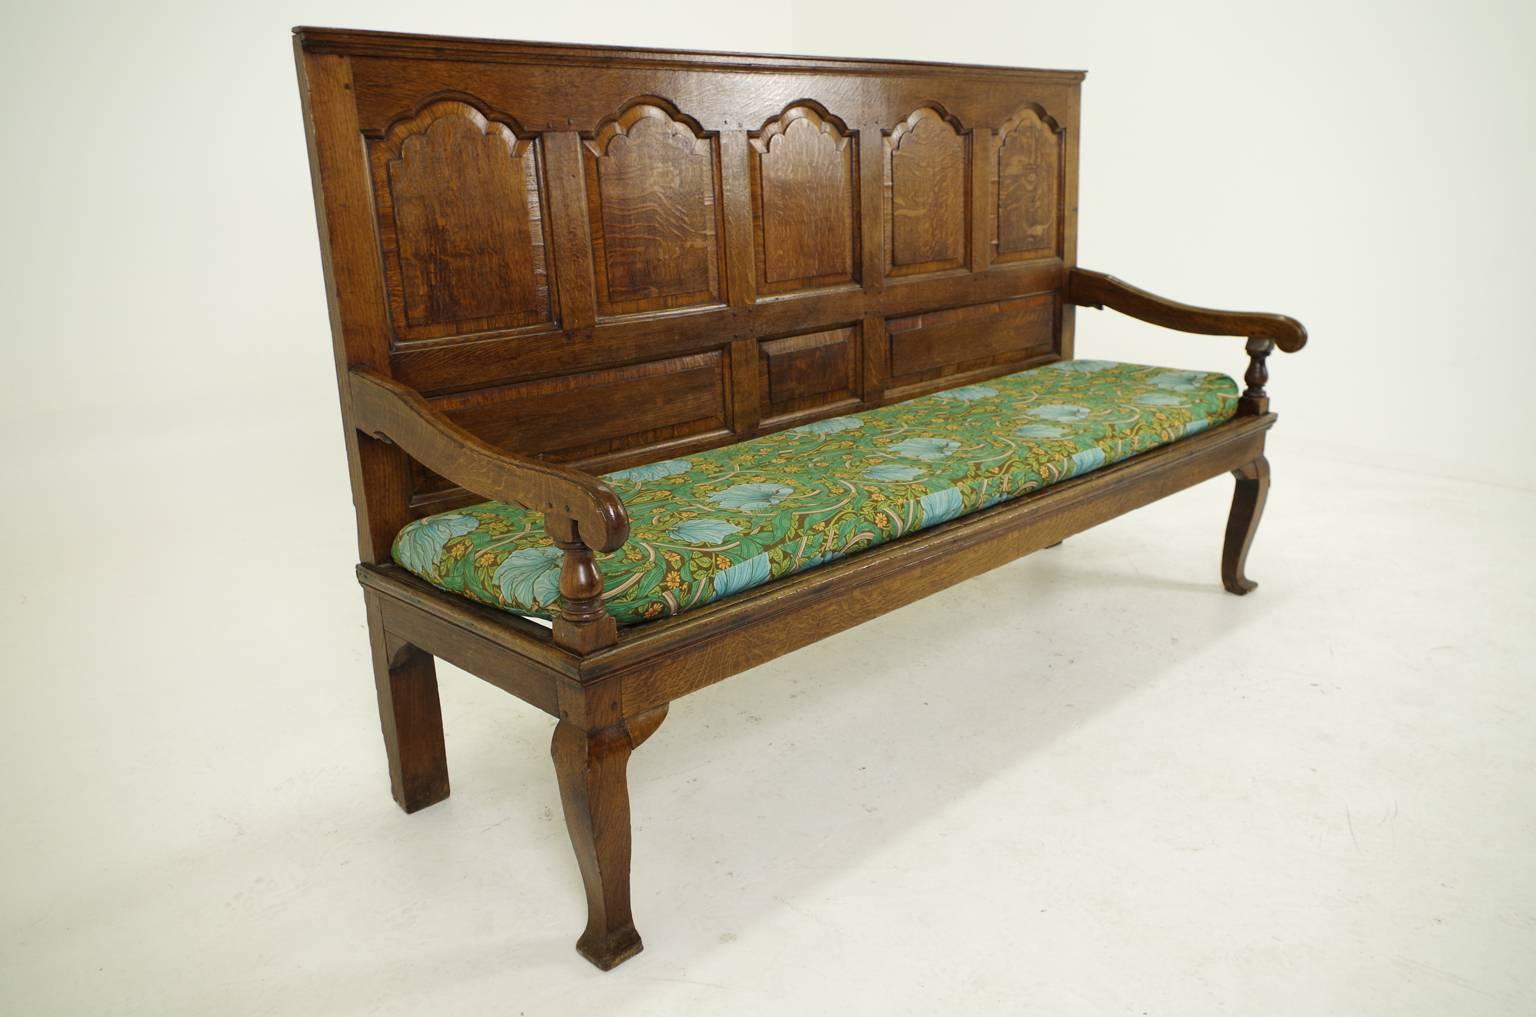 Queen Anne 18th Century Scottish Panelled Back Oak Settle, Bench, Hall Seat